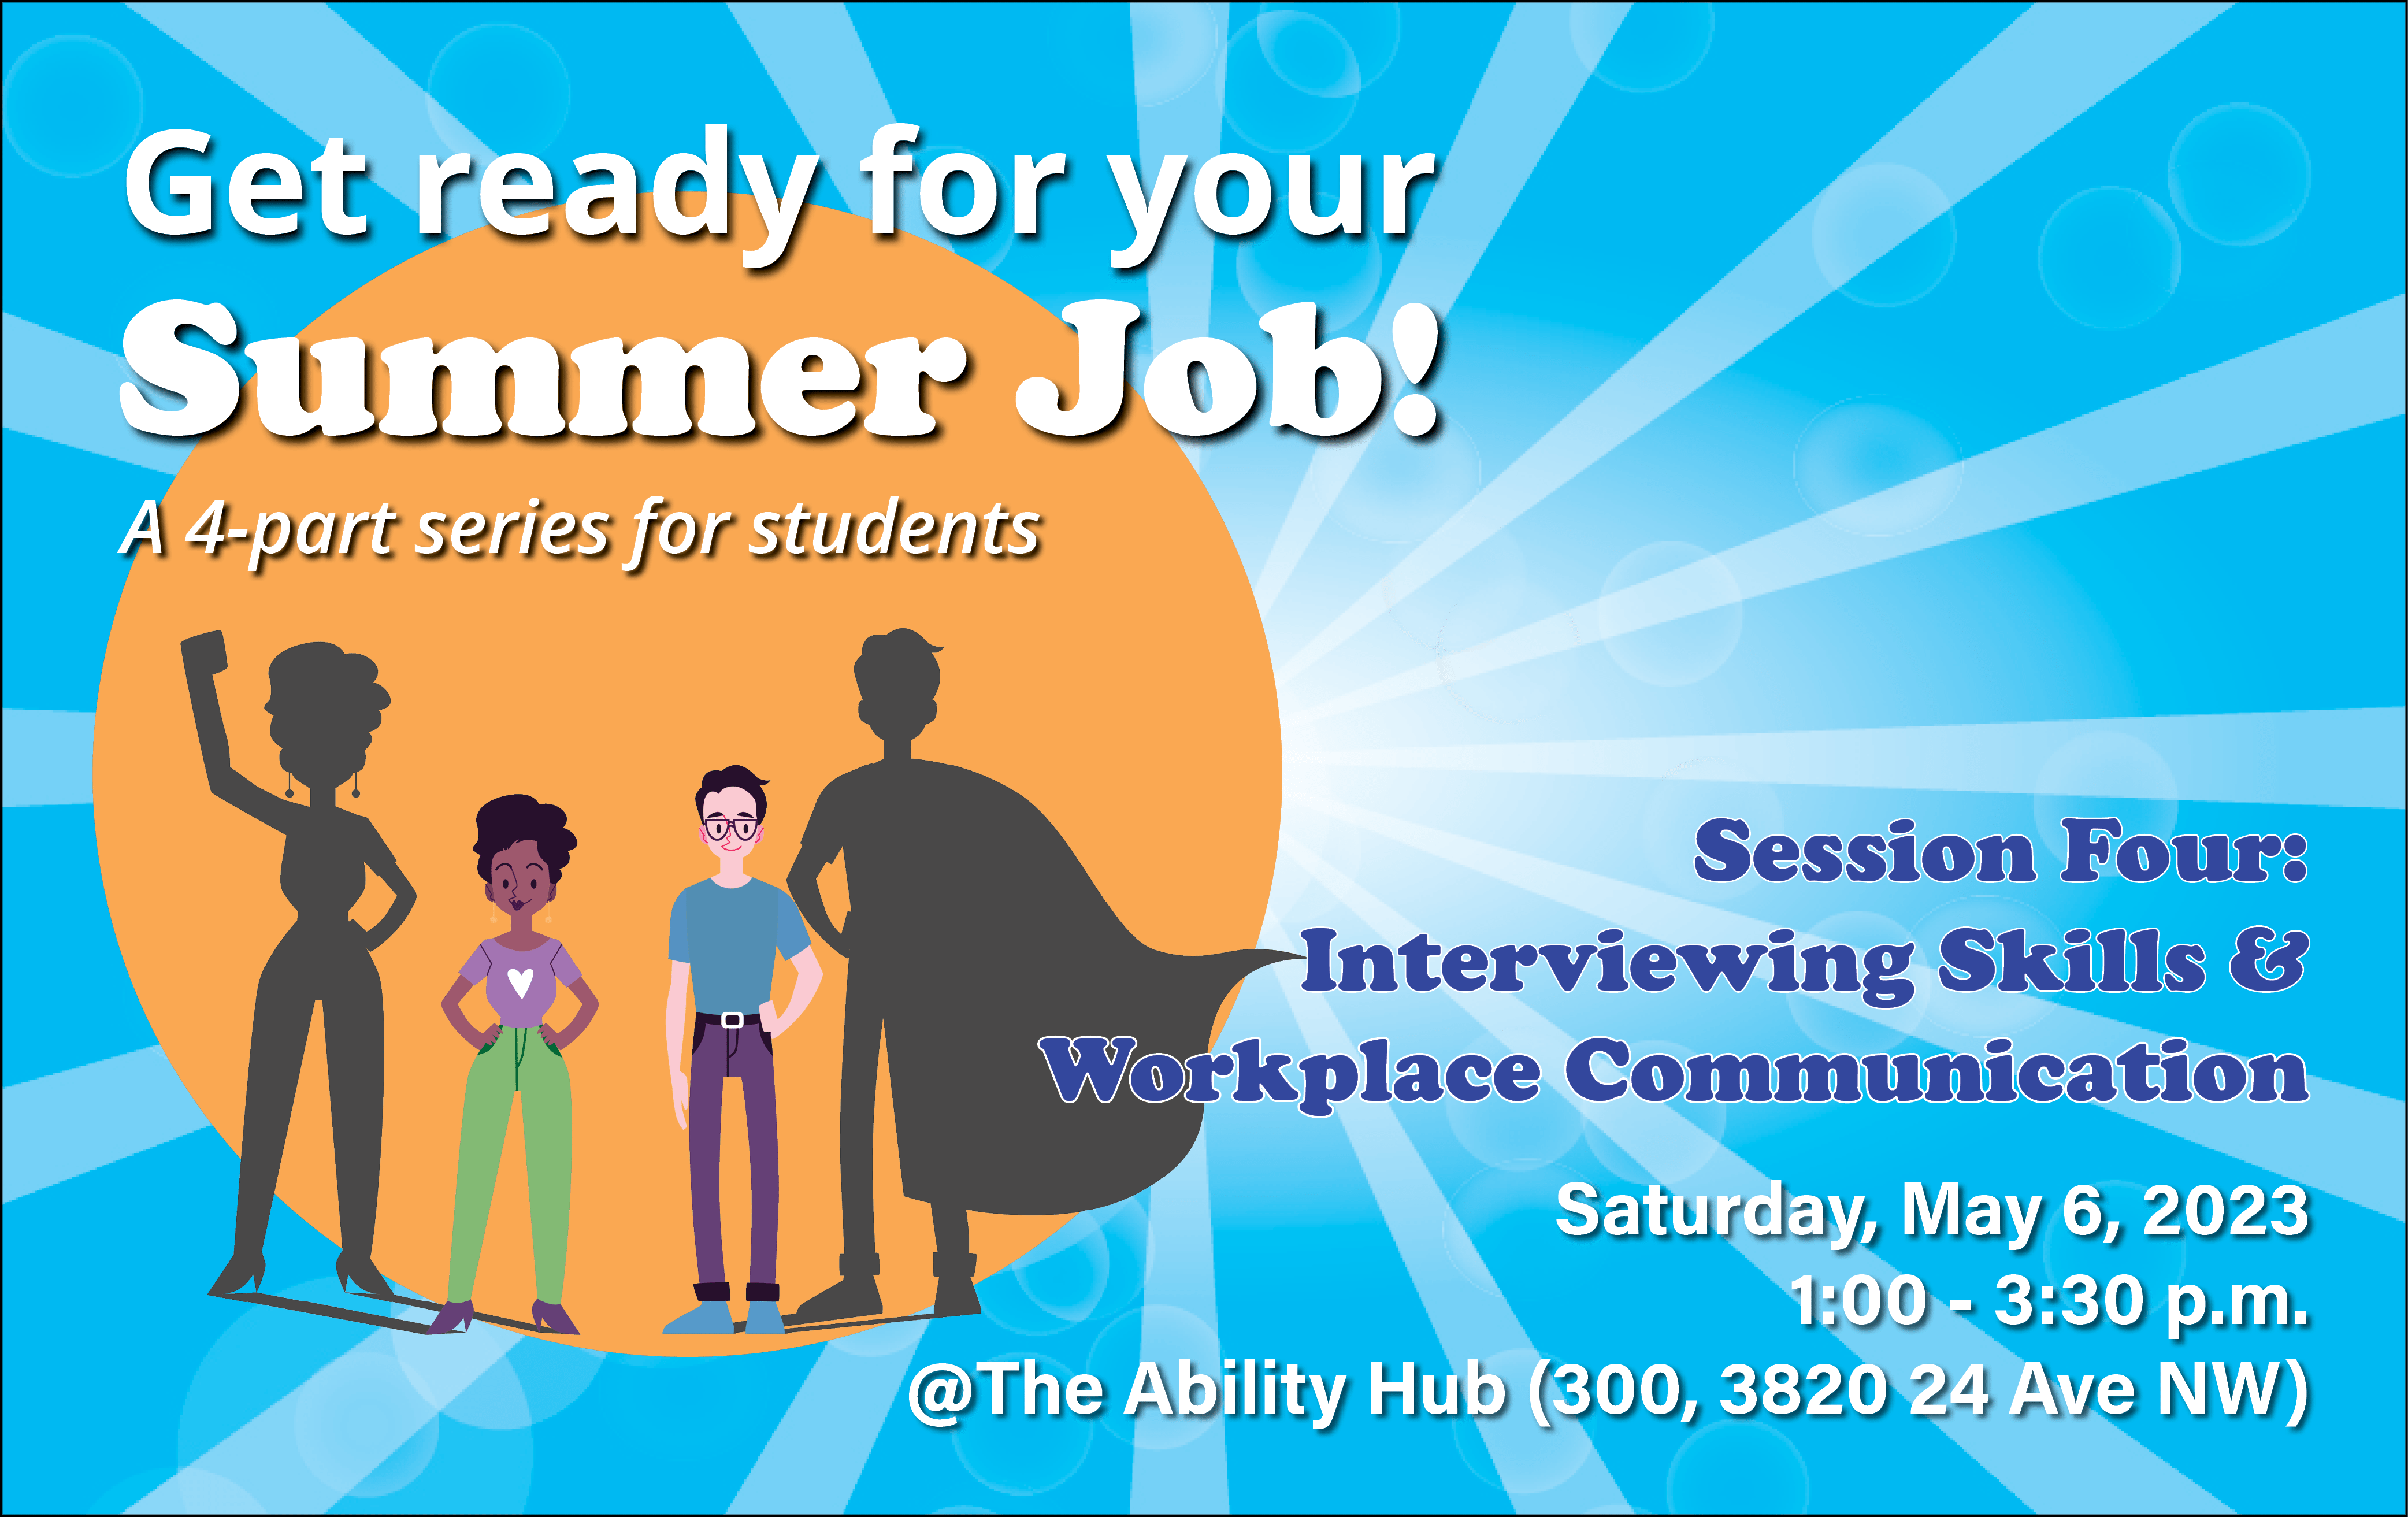 Summer job series, employment support, session 4